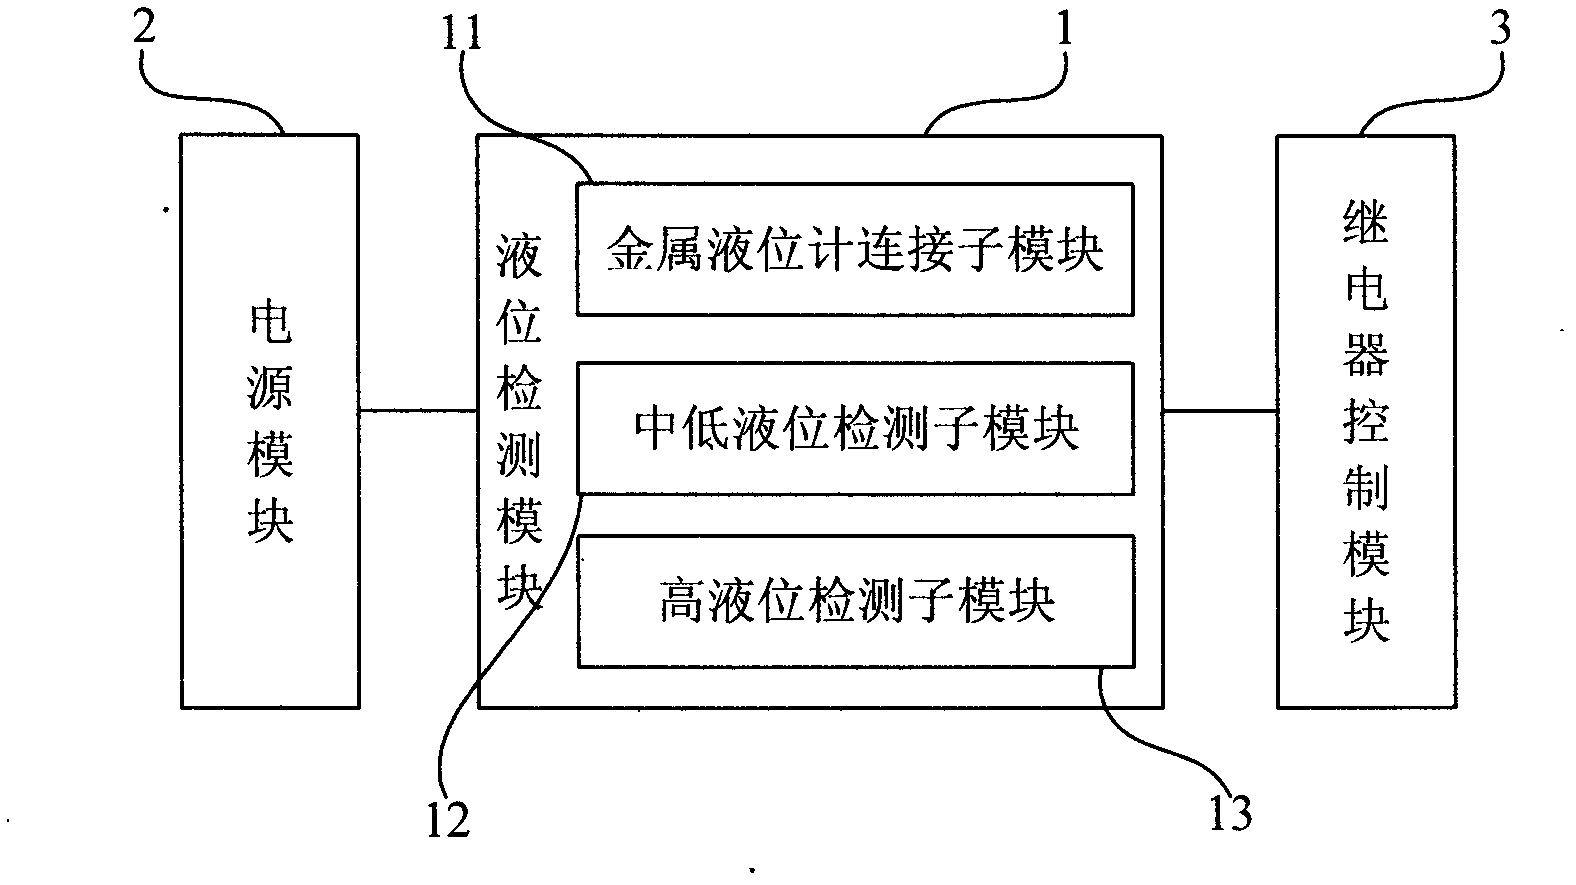 Bentonite slurrying control system for shield construction and method